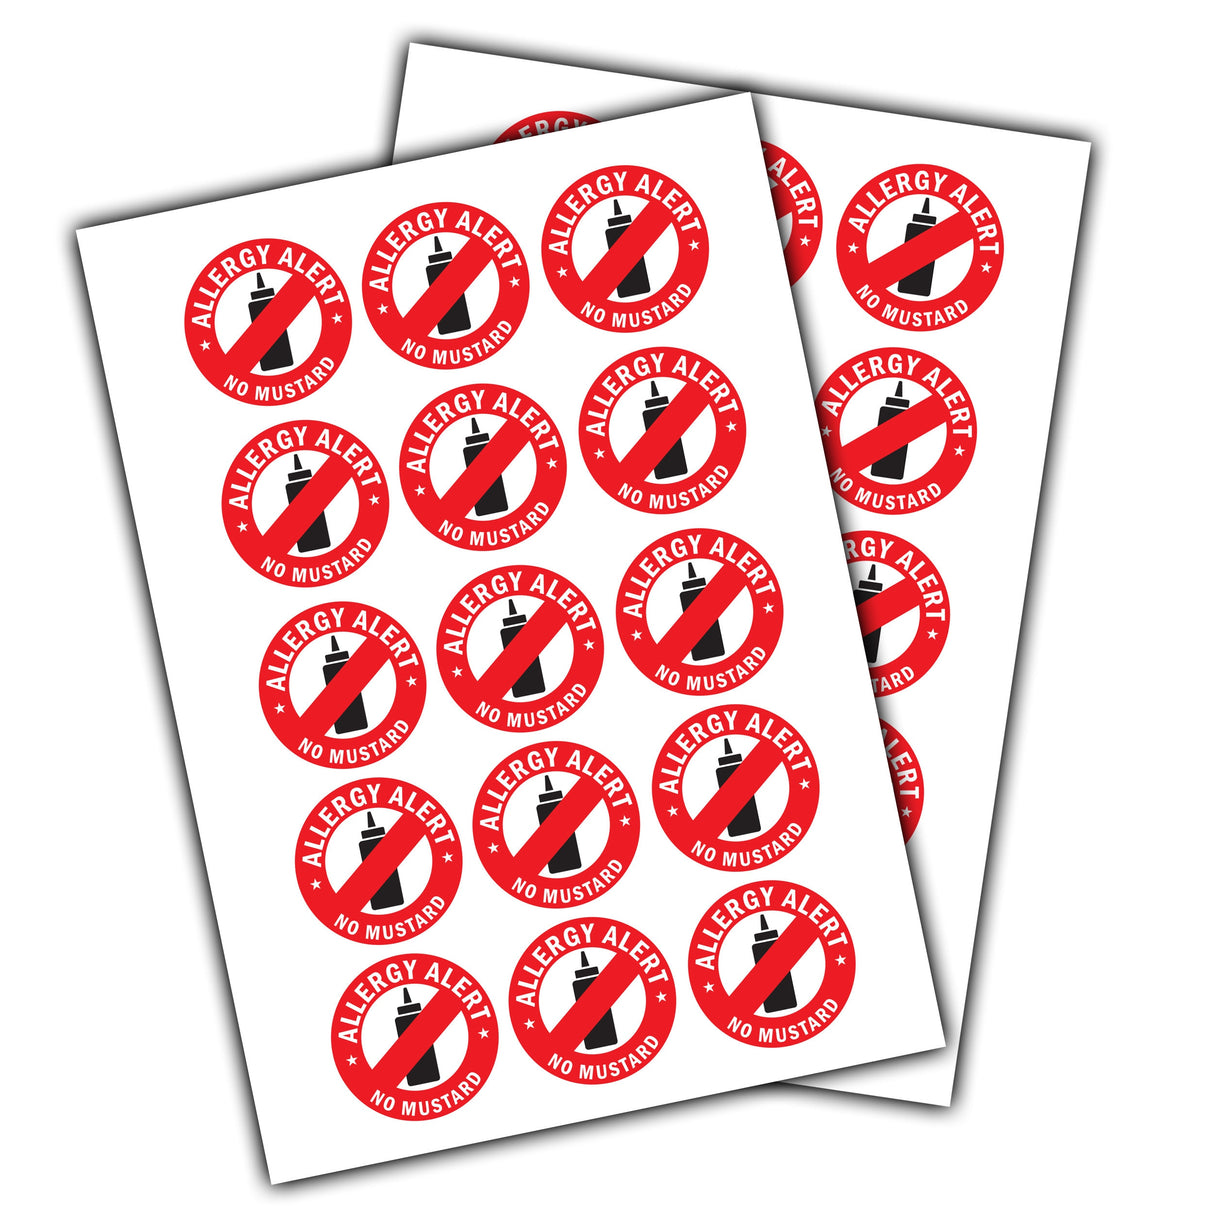 Mustard Allergy Awareness Labels - Safety Precaution Stickers Alerting to Allergens